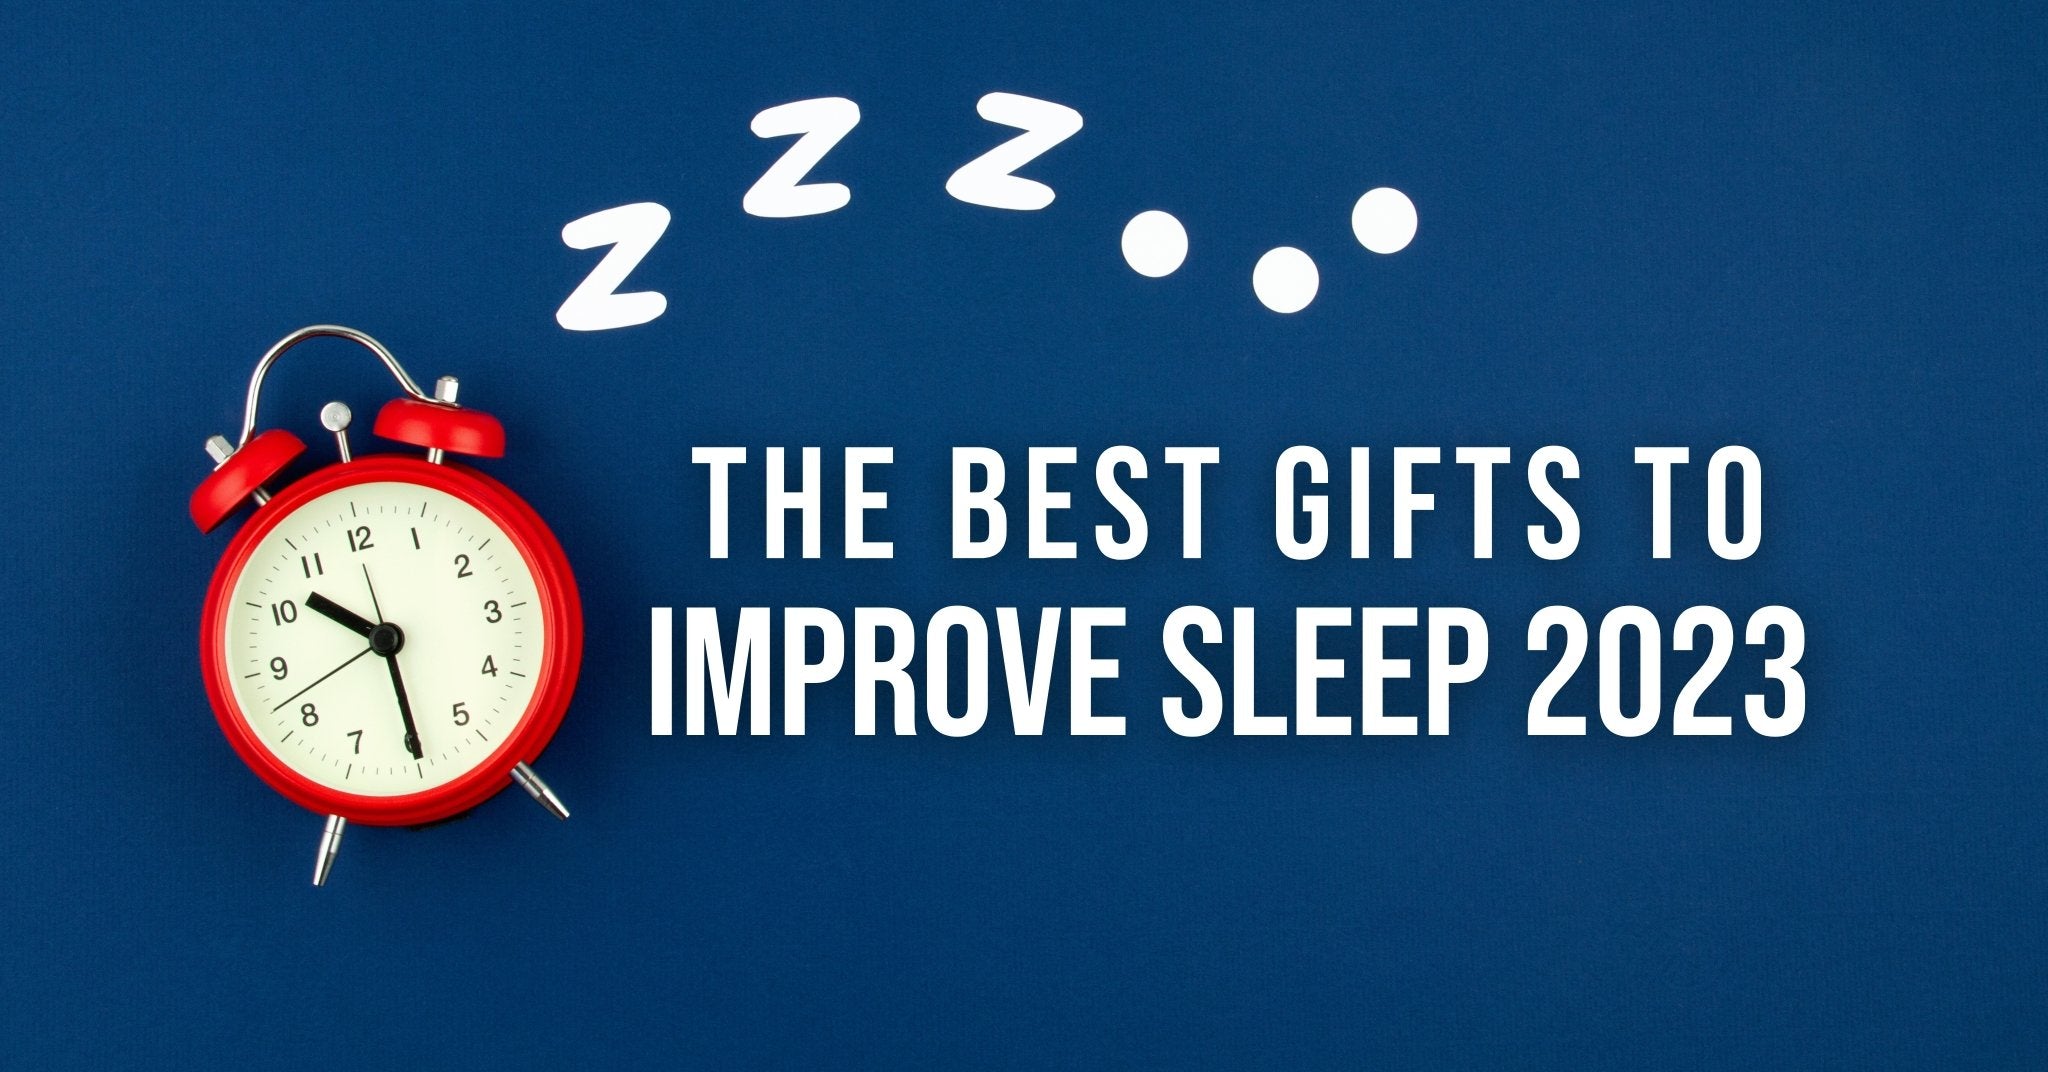 Sleep Gift Guide: Gifts For Sleep Lovers And Those In Need Of More